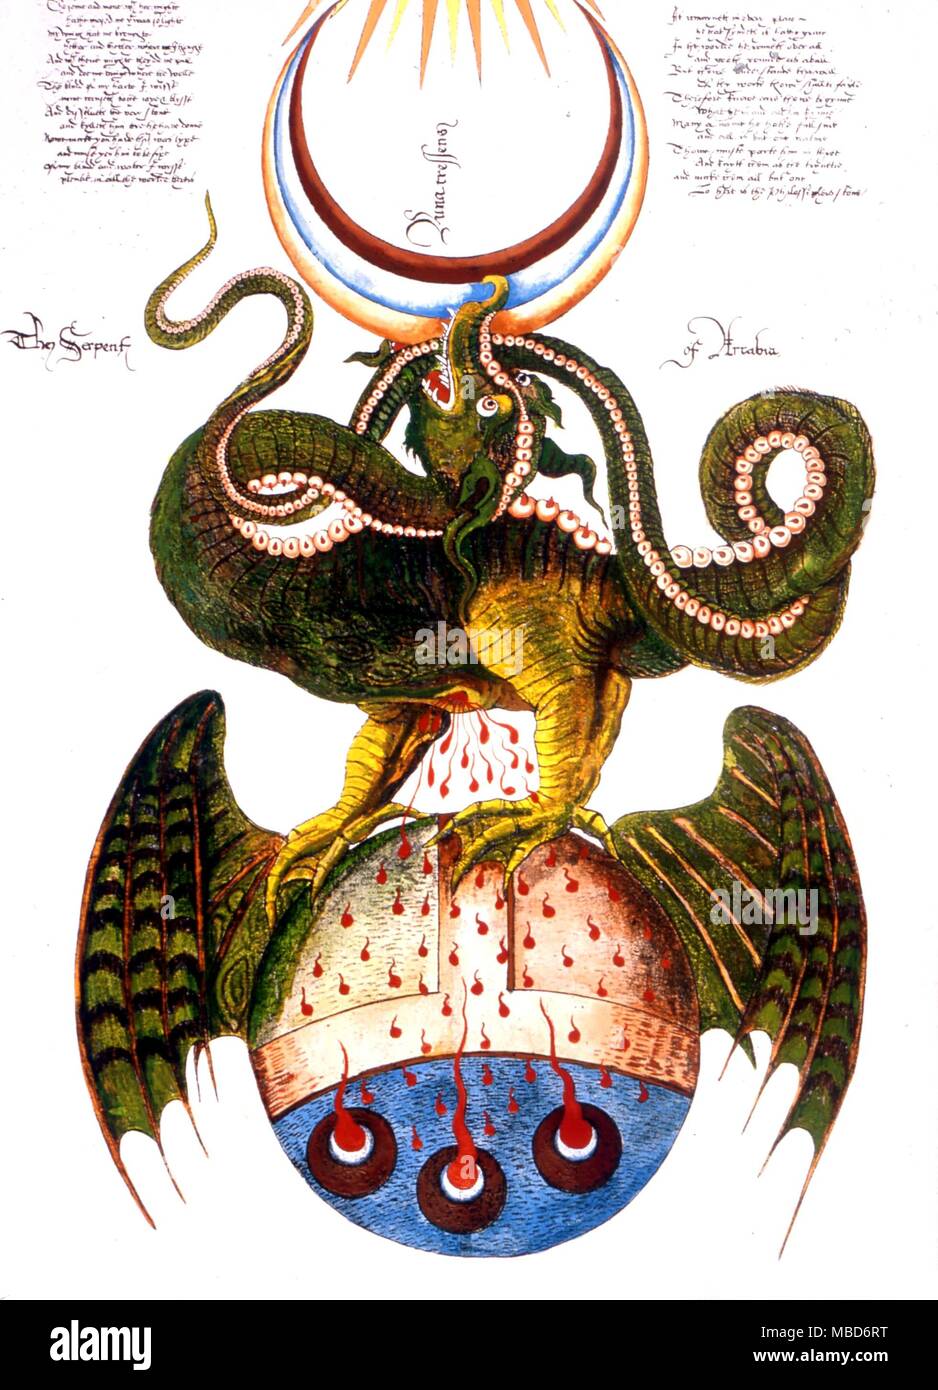 DRAGON - SERPENT OF ARABIA - The alchemical system of Sir George Ripley, of Bridlington (died 1490 ). The original scrolls (of which about 20 are known) are 18 feet long. This is a modern copy. The Serpent of Arabia, the Triple Sun, and the Moon. Stock Photo